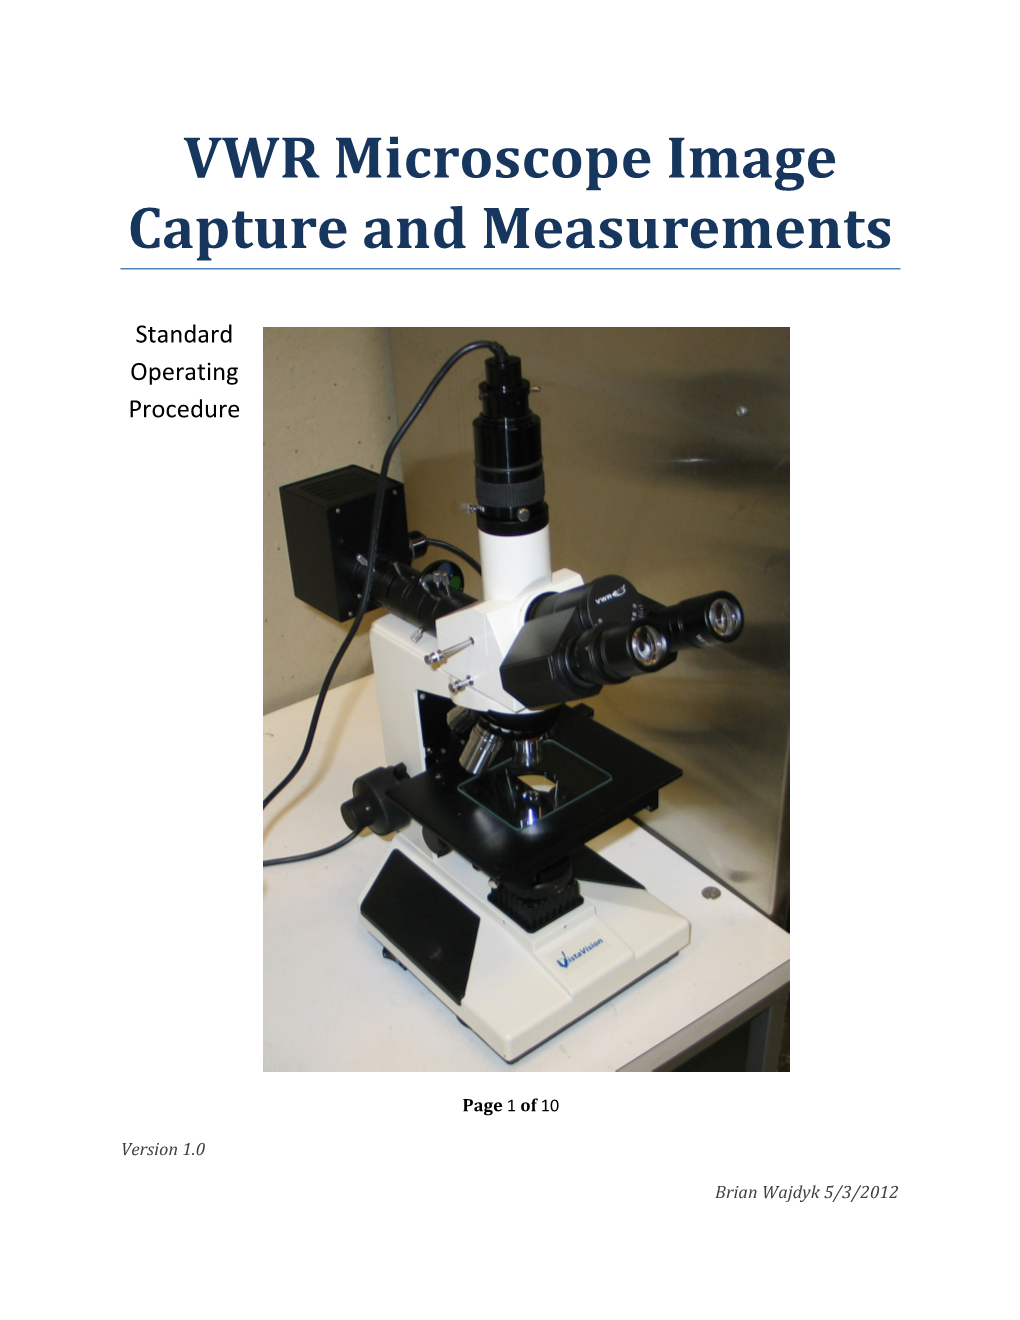 VWR Microscope Image Capture and Measurements